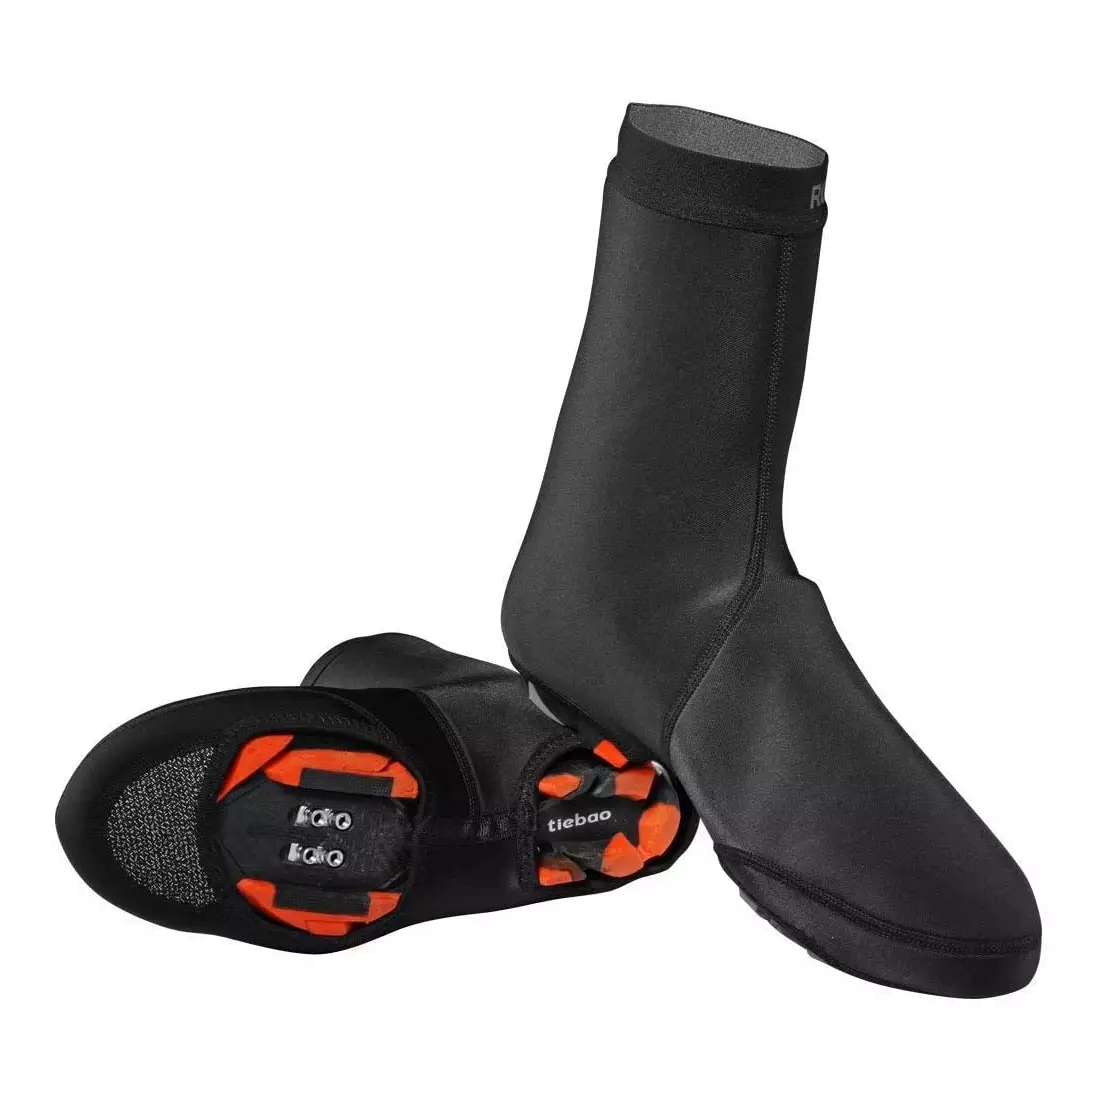 Rockbros covers for cycling shoes, neoprene LF1015